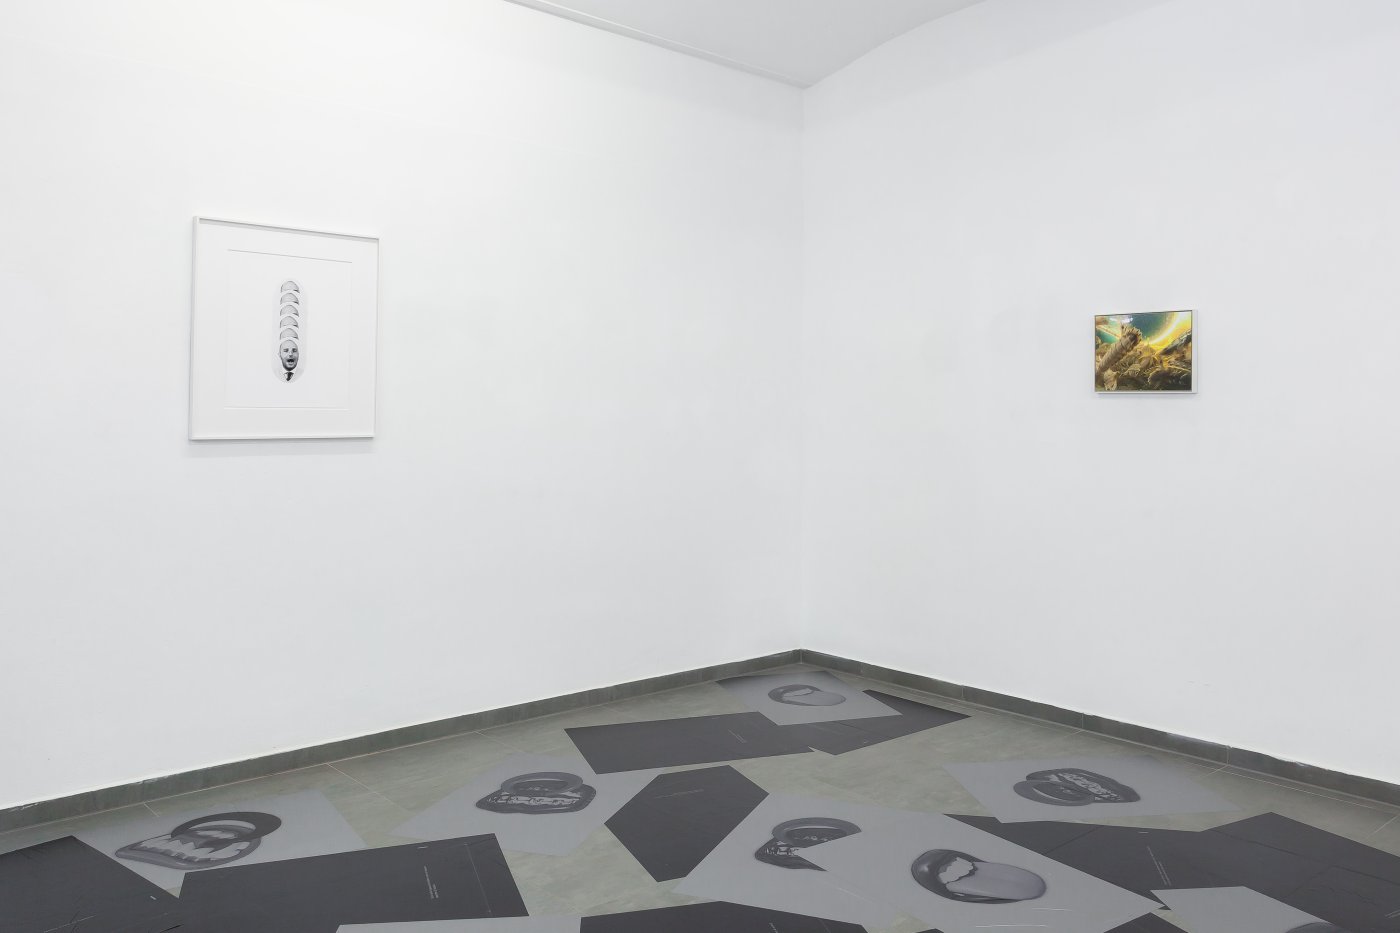 Installation image for Chew, at Vin Vin